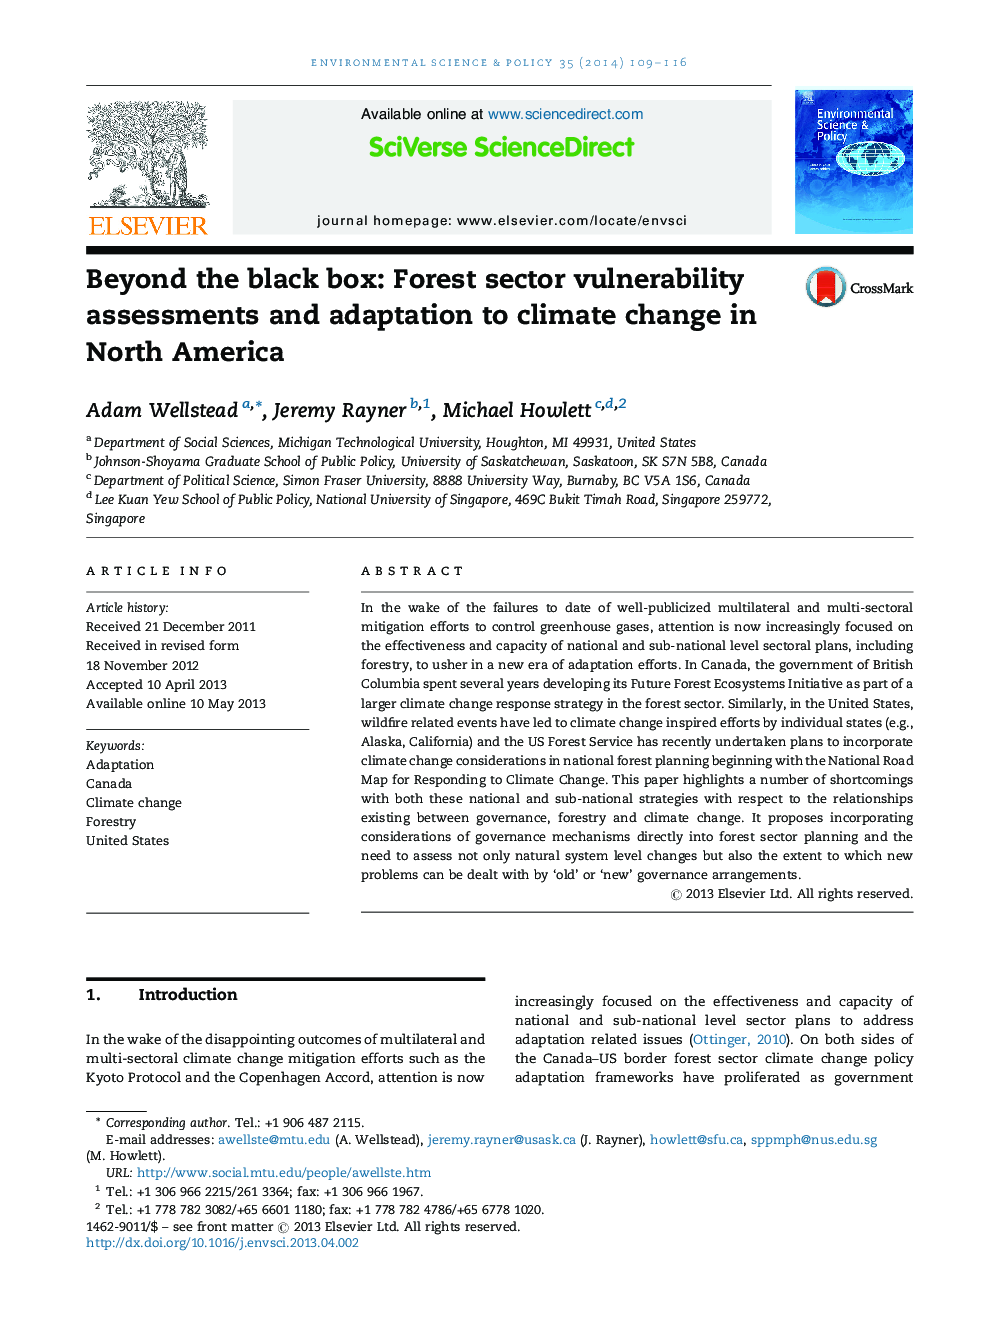 Beyond the black box: Forest sector vulnerability assessments and adaptation to climate change in North America